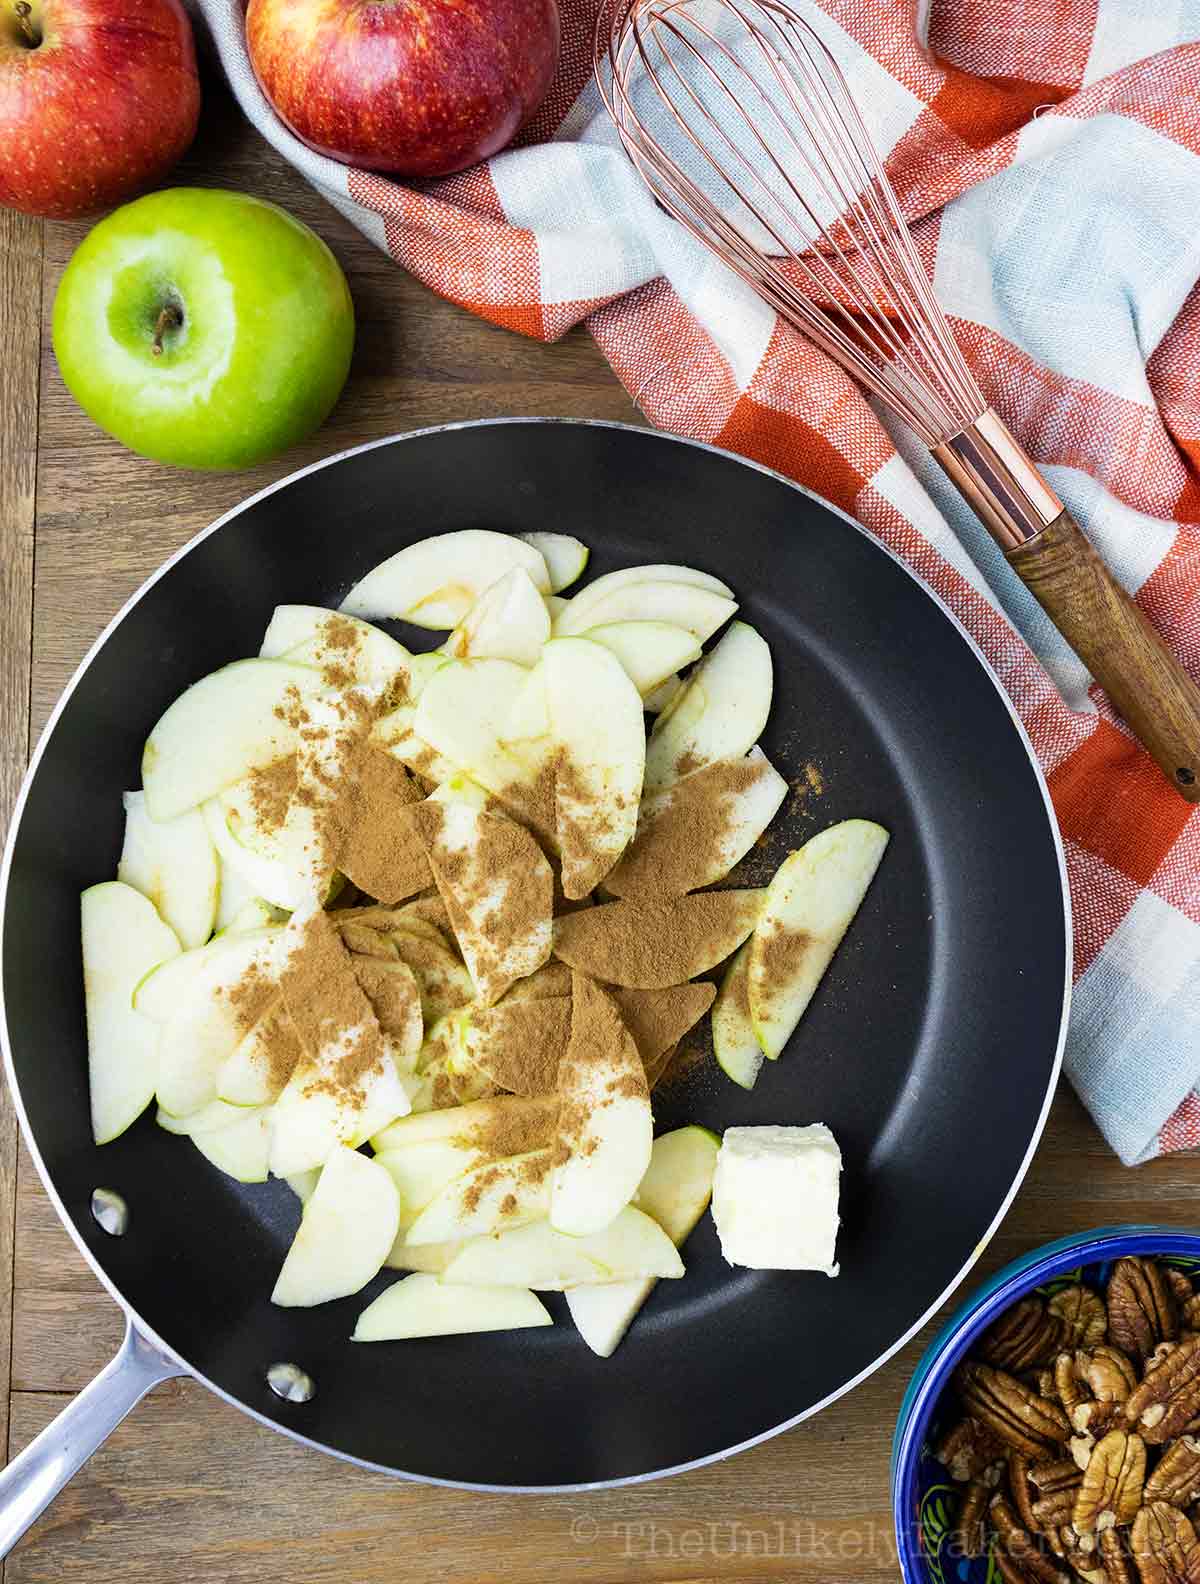 Slices of apples with cinnamon on a pan.